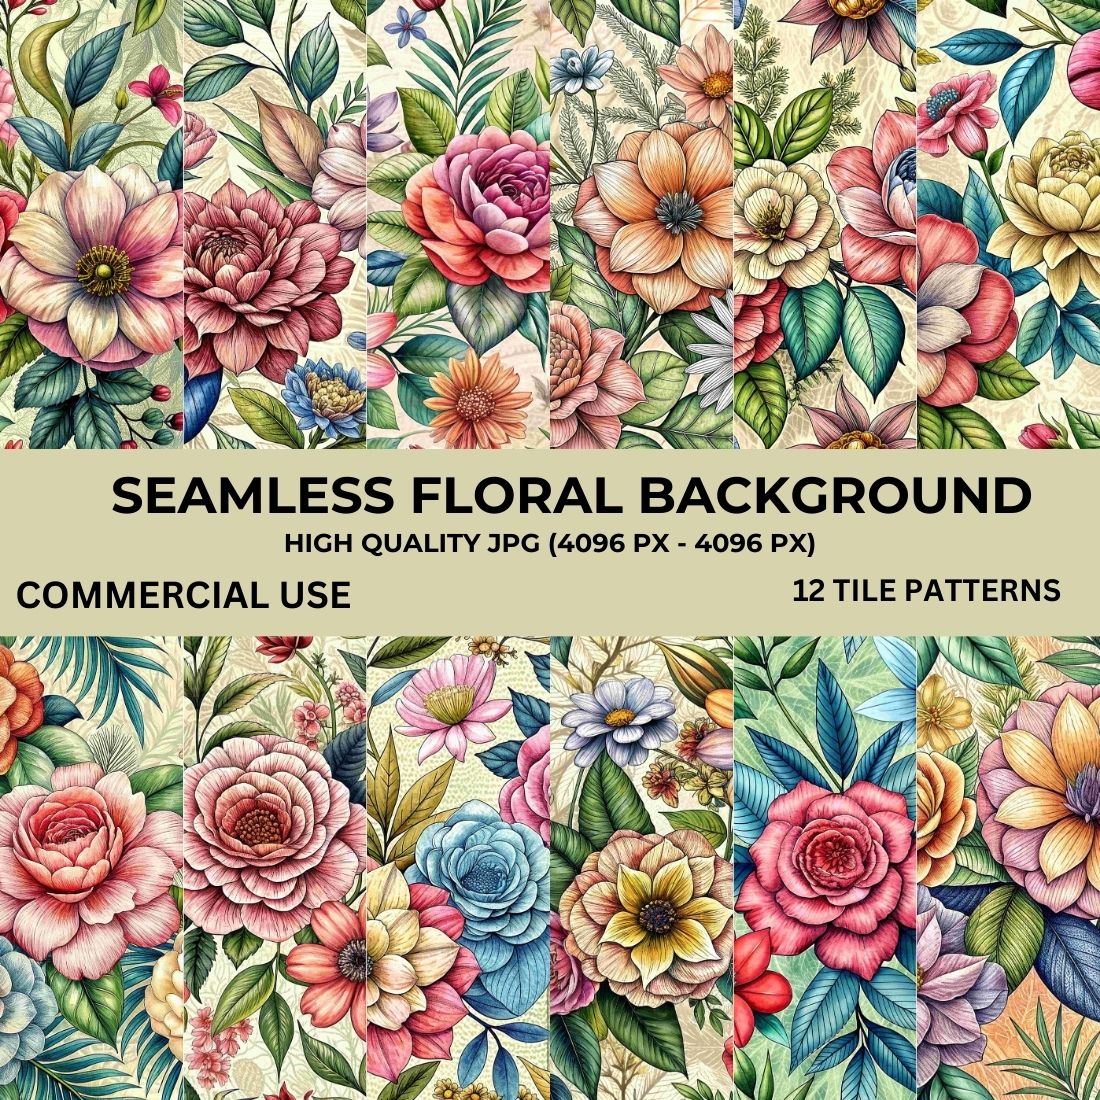 Seamless Floral Hand Drawn Background Bundle cover image.